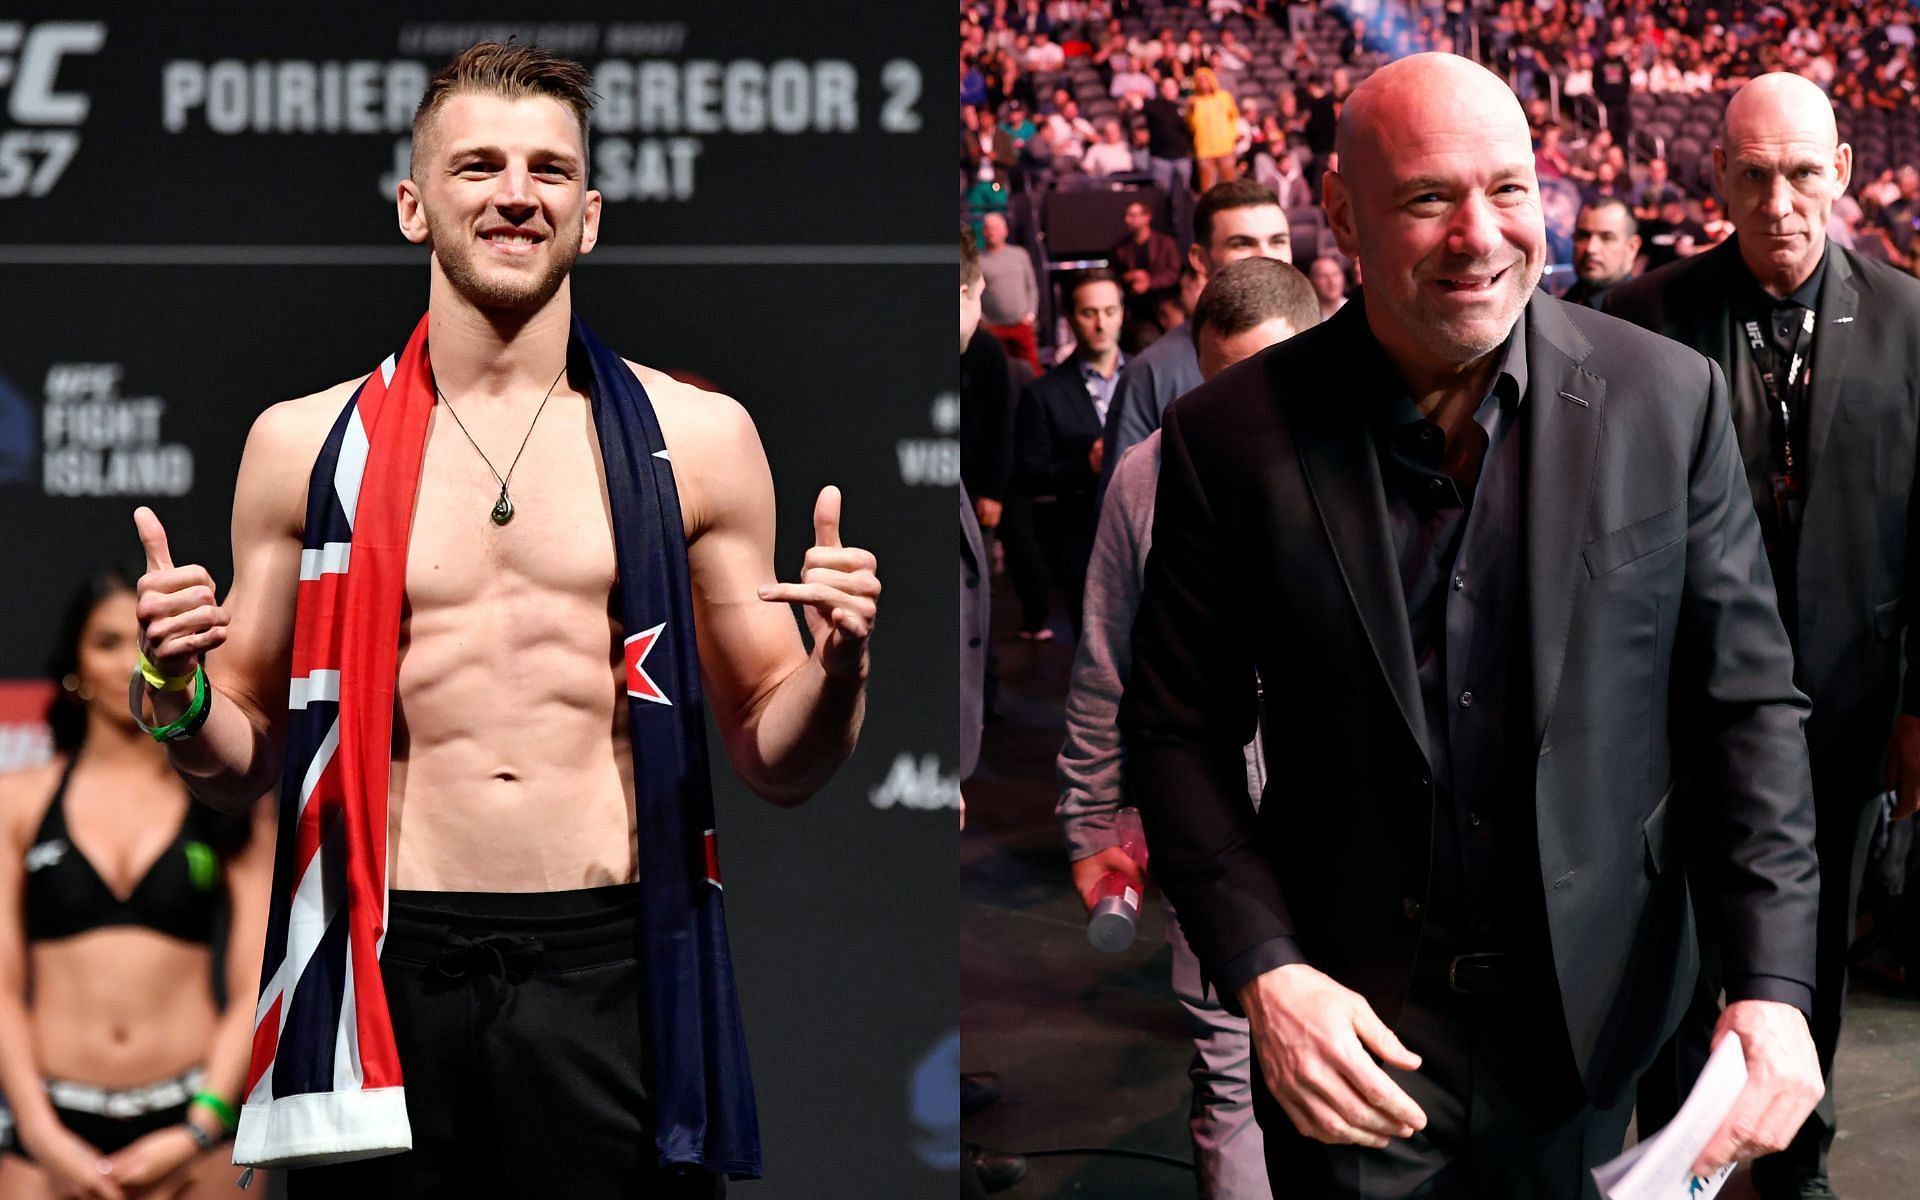 Dan Hooker (left) and Dana White (right) (Image credits Getty Images)